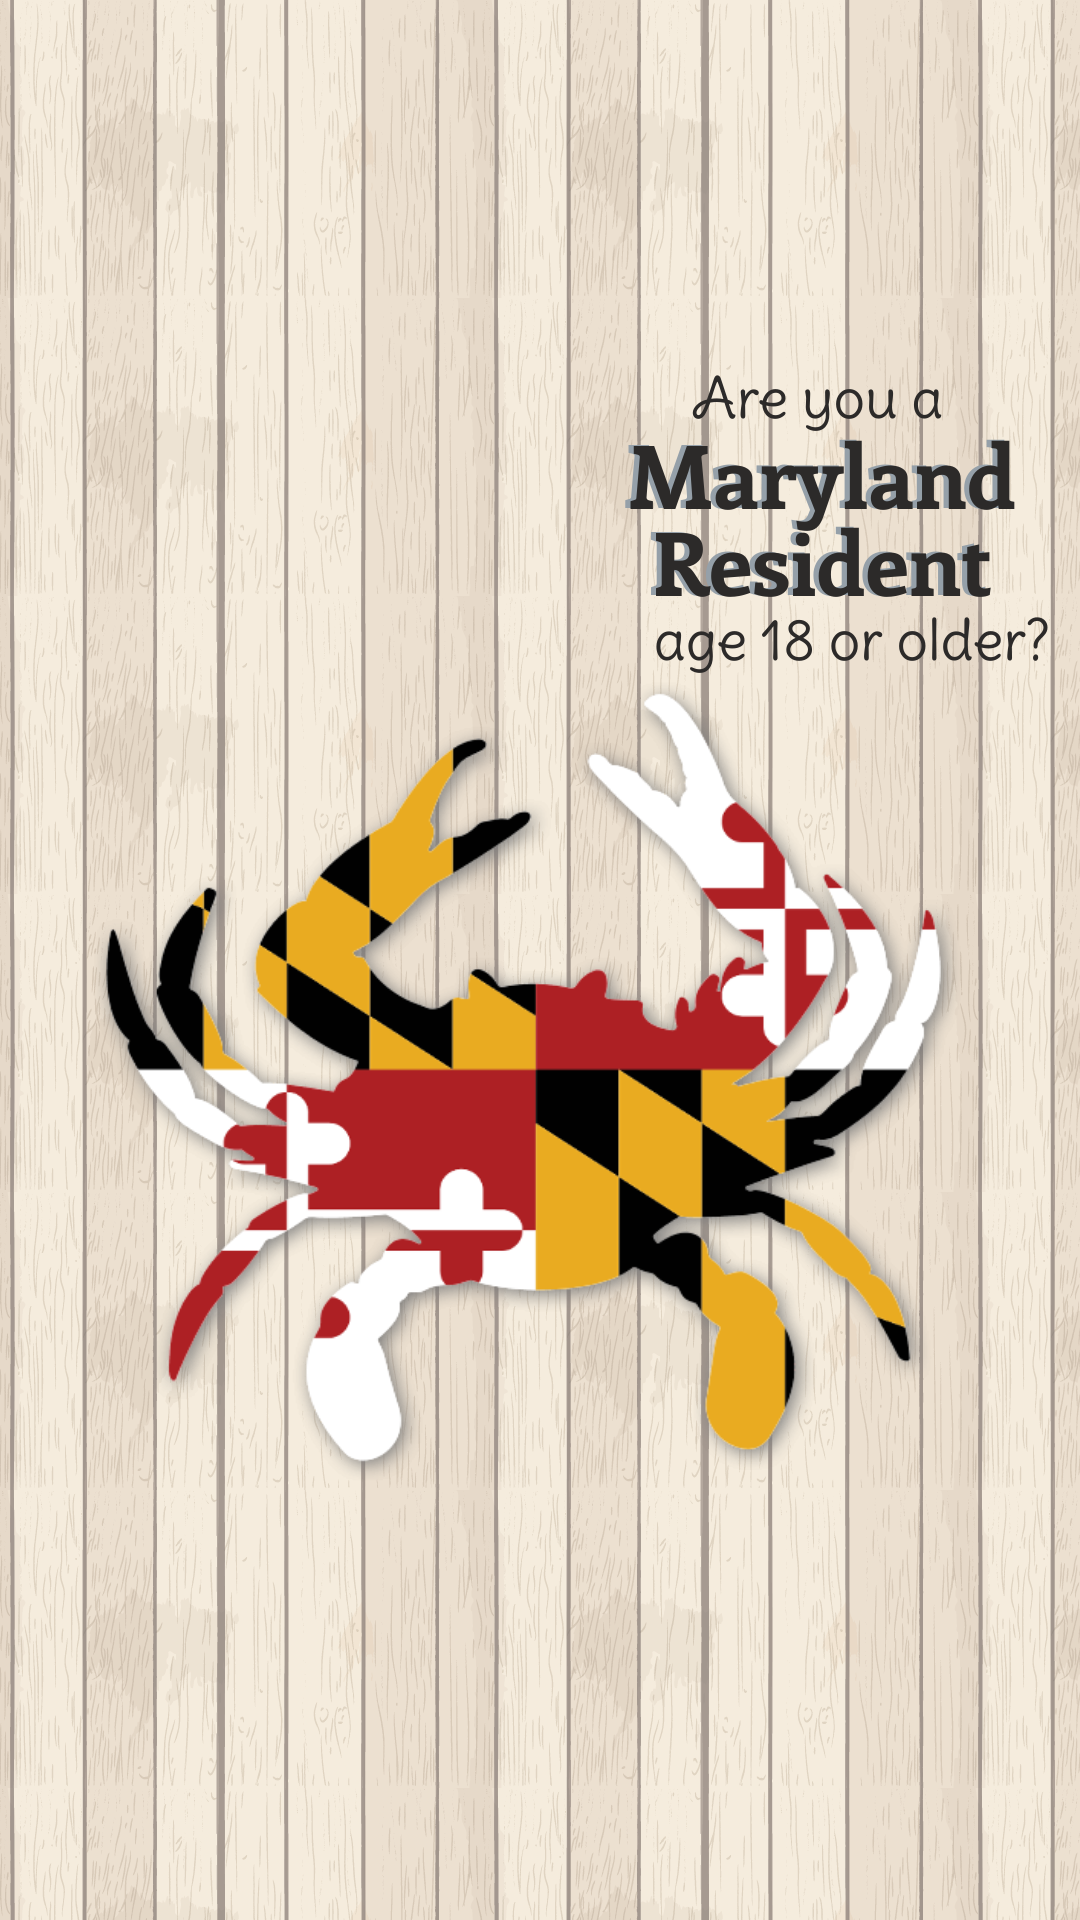 Are You a Maryland Resident Age 18 or Older?